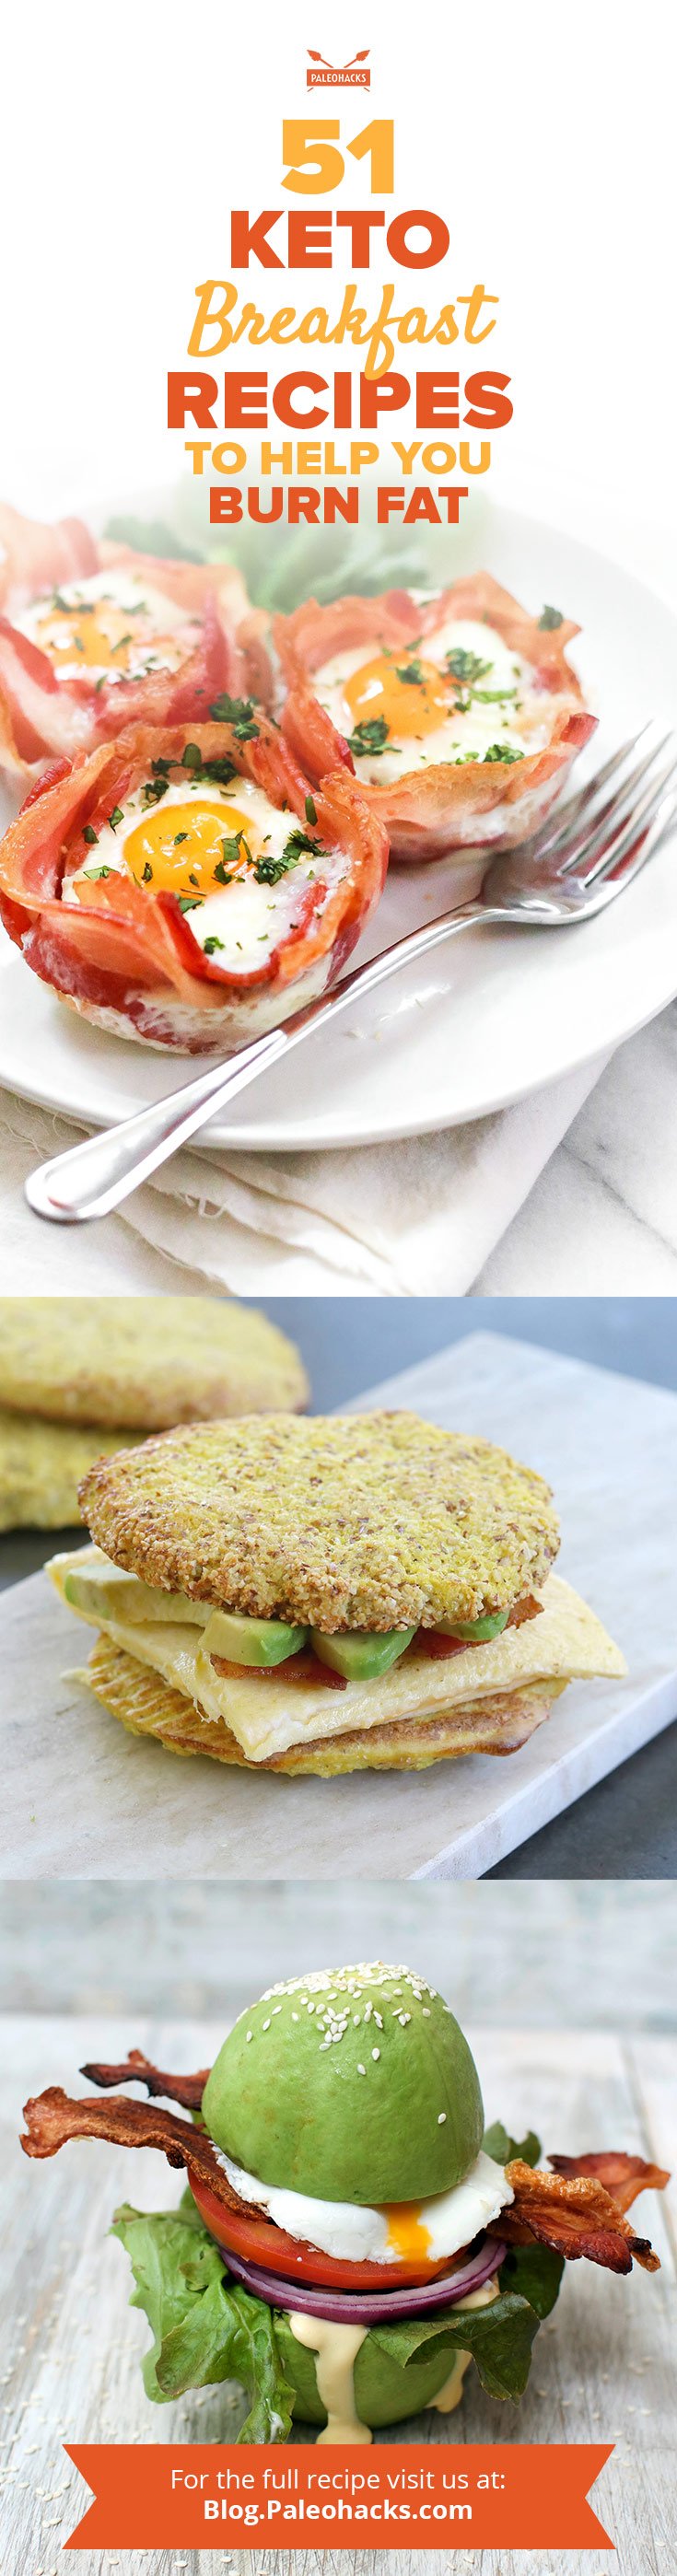 Kickstart mornings with these low carb, keto breakfast recipes to help you burn fat throughout the day.